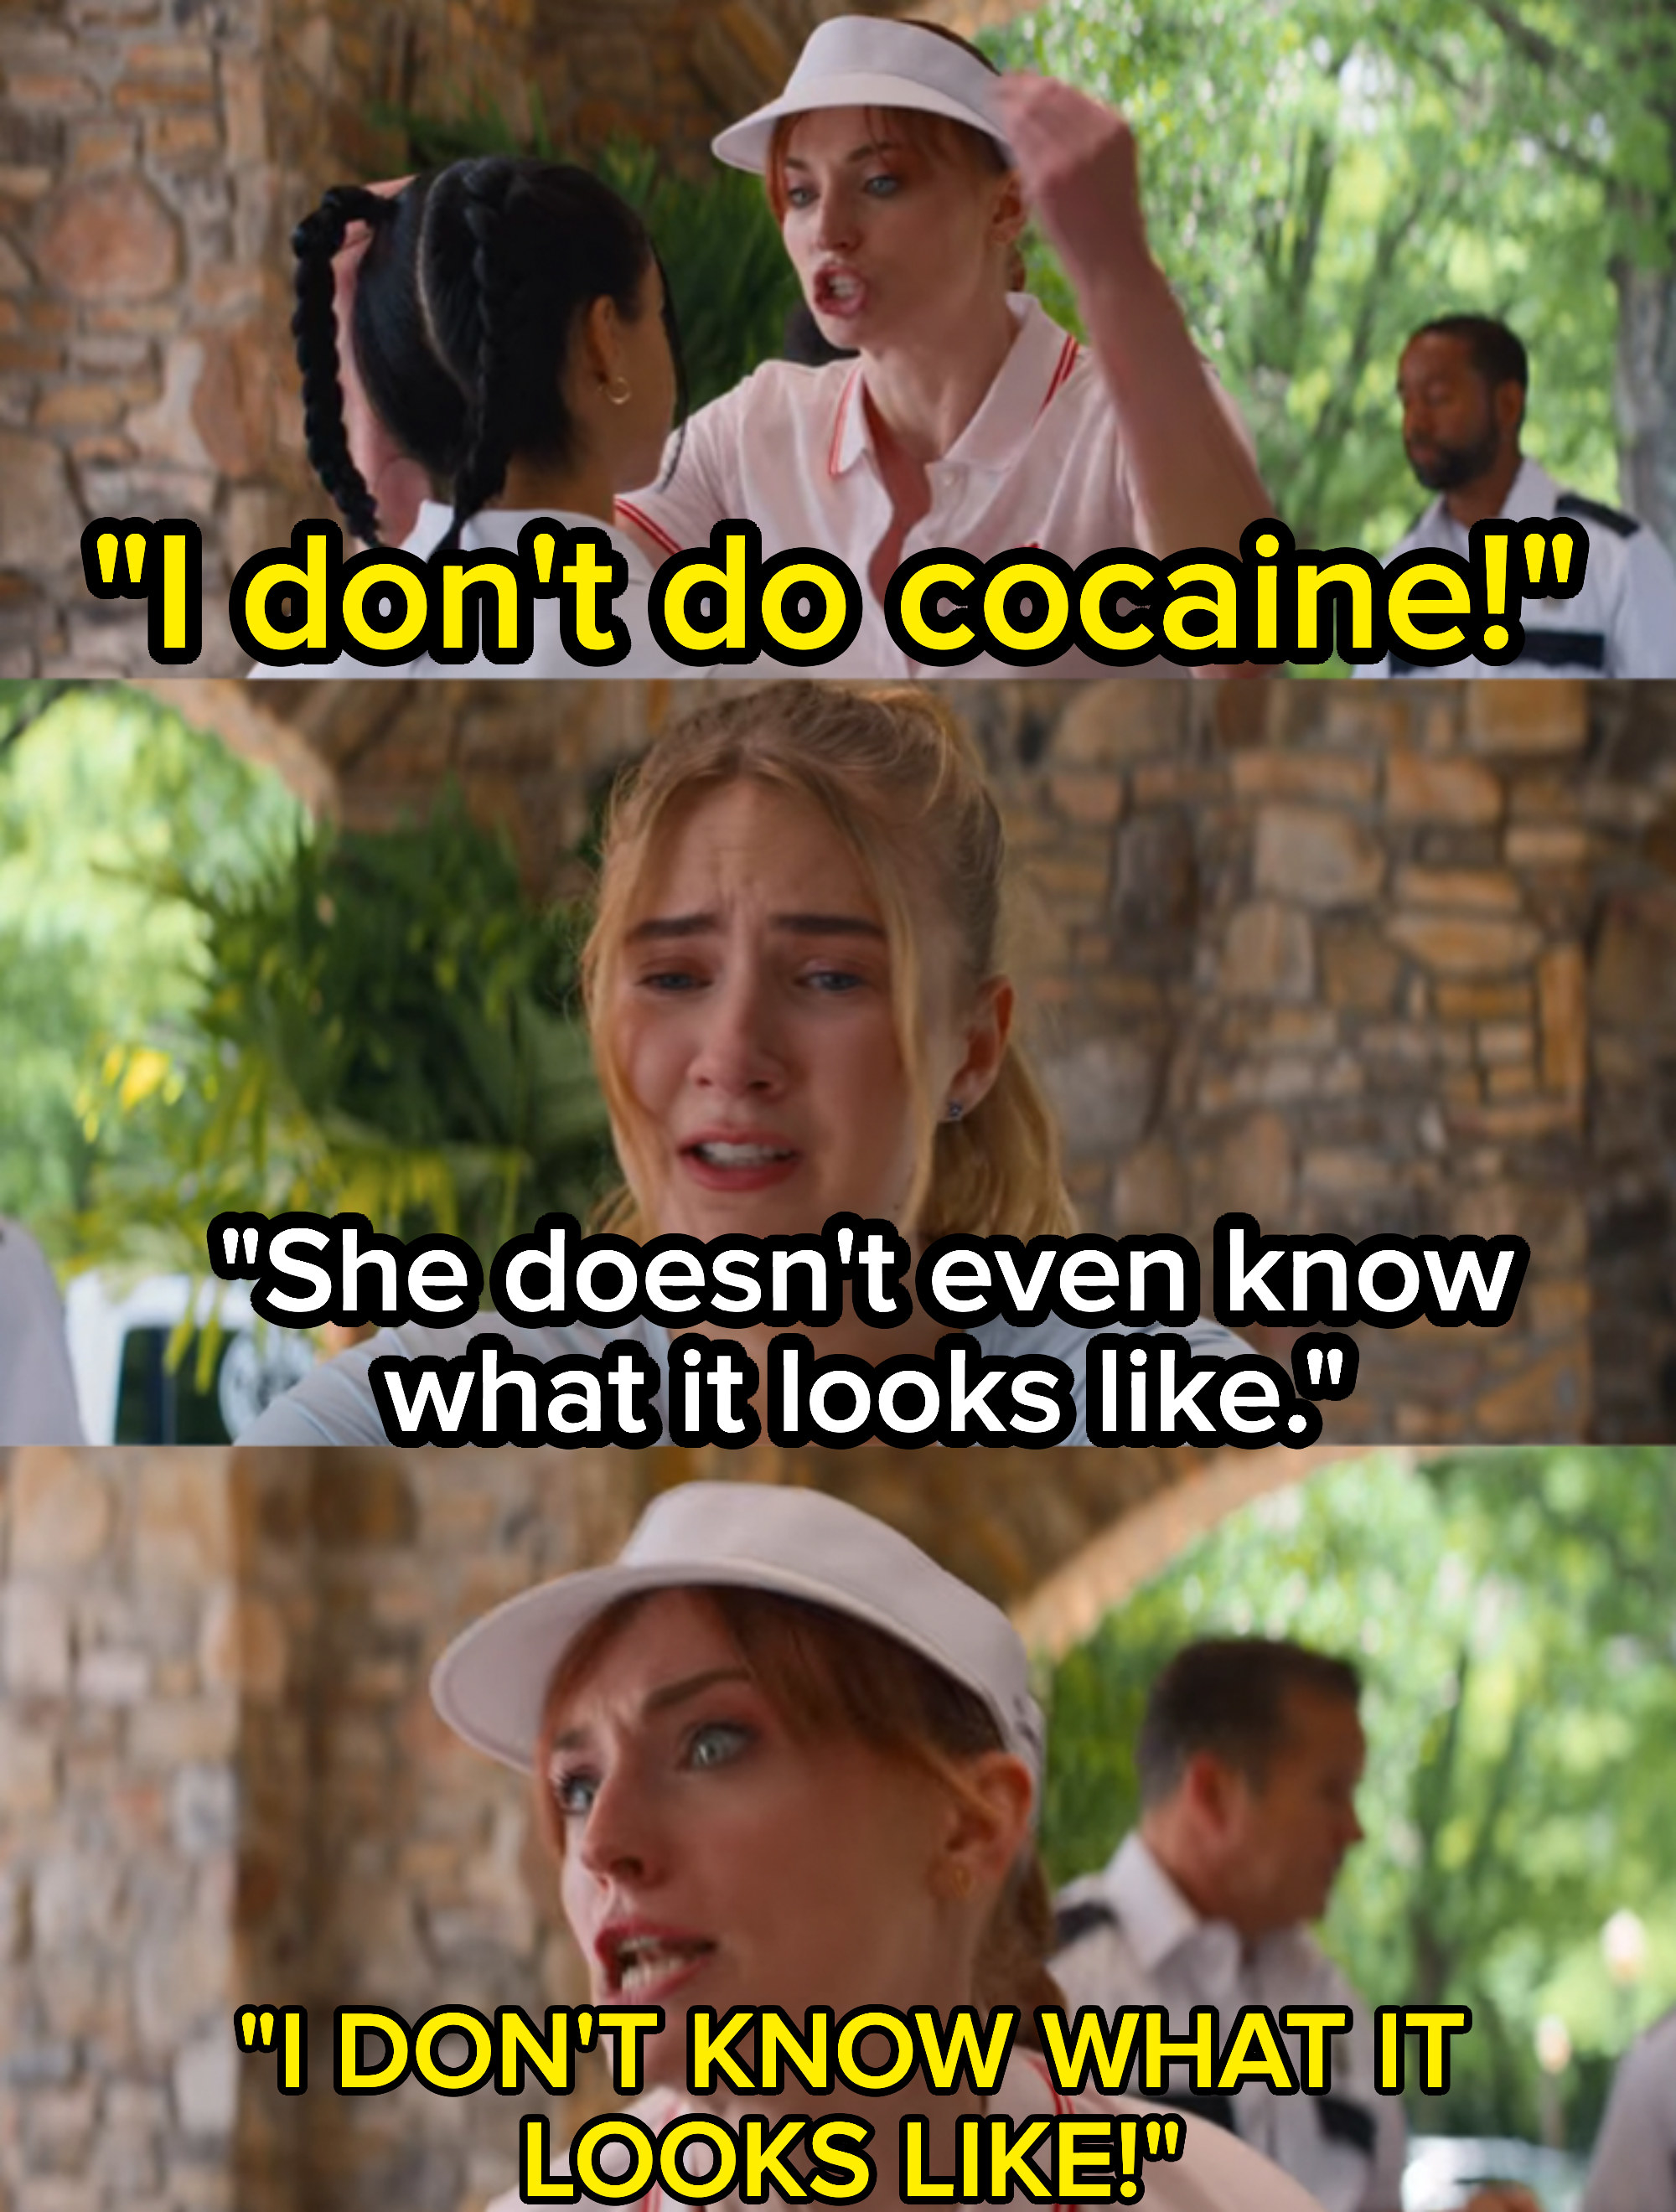 Sophie&#x27;s script lines &quot;I don&#x27;t do cocaine!&quot; &quot;She doesn&#x27;t even know what it looks like,&quot; and &quot;I don&#x27;t know what it looks like!&quot;